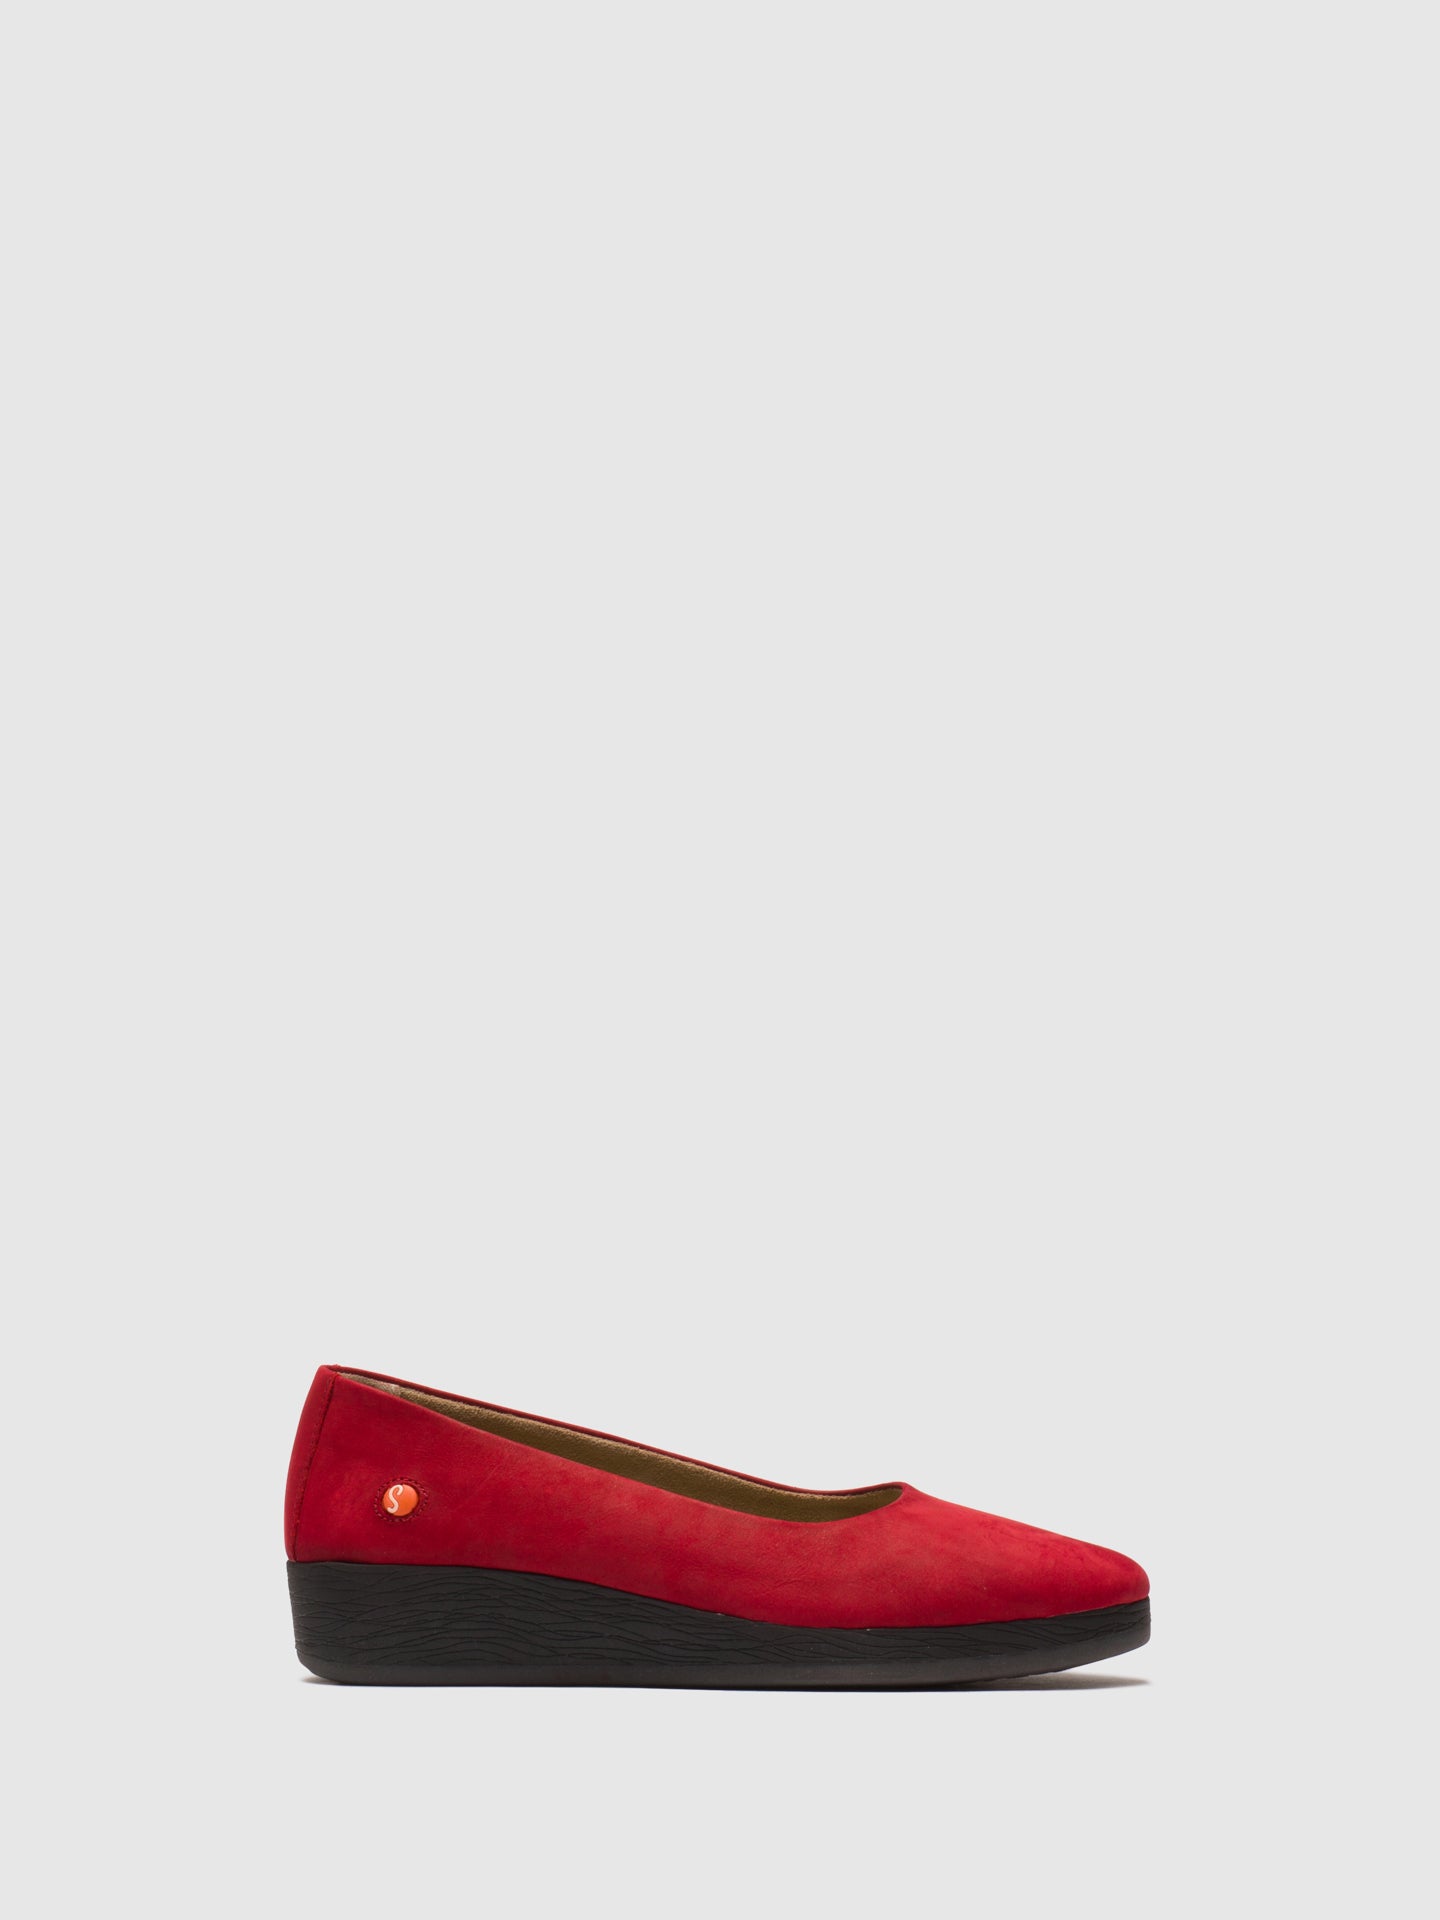 Softinos Red Wedge Shoes